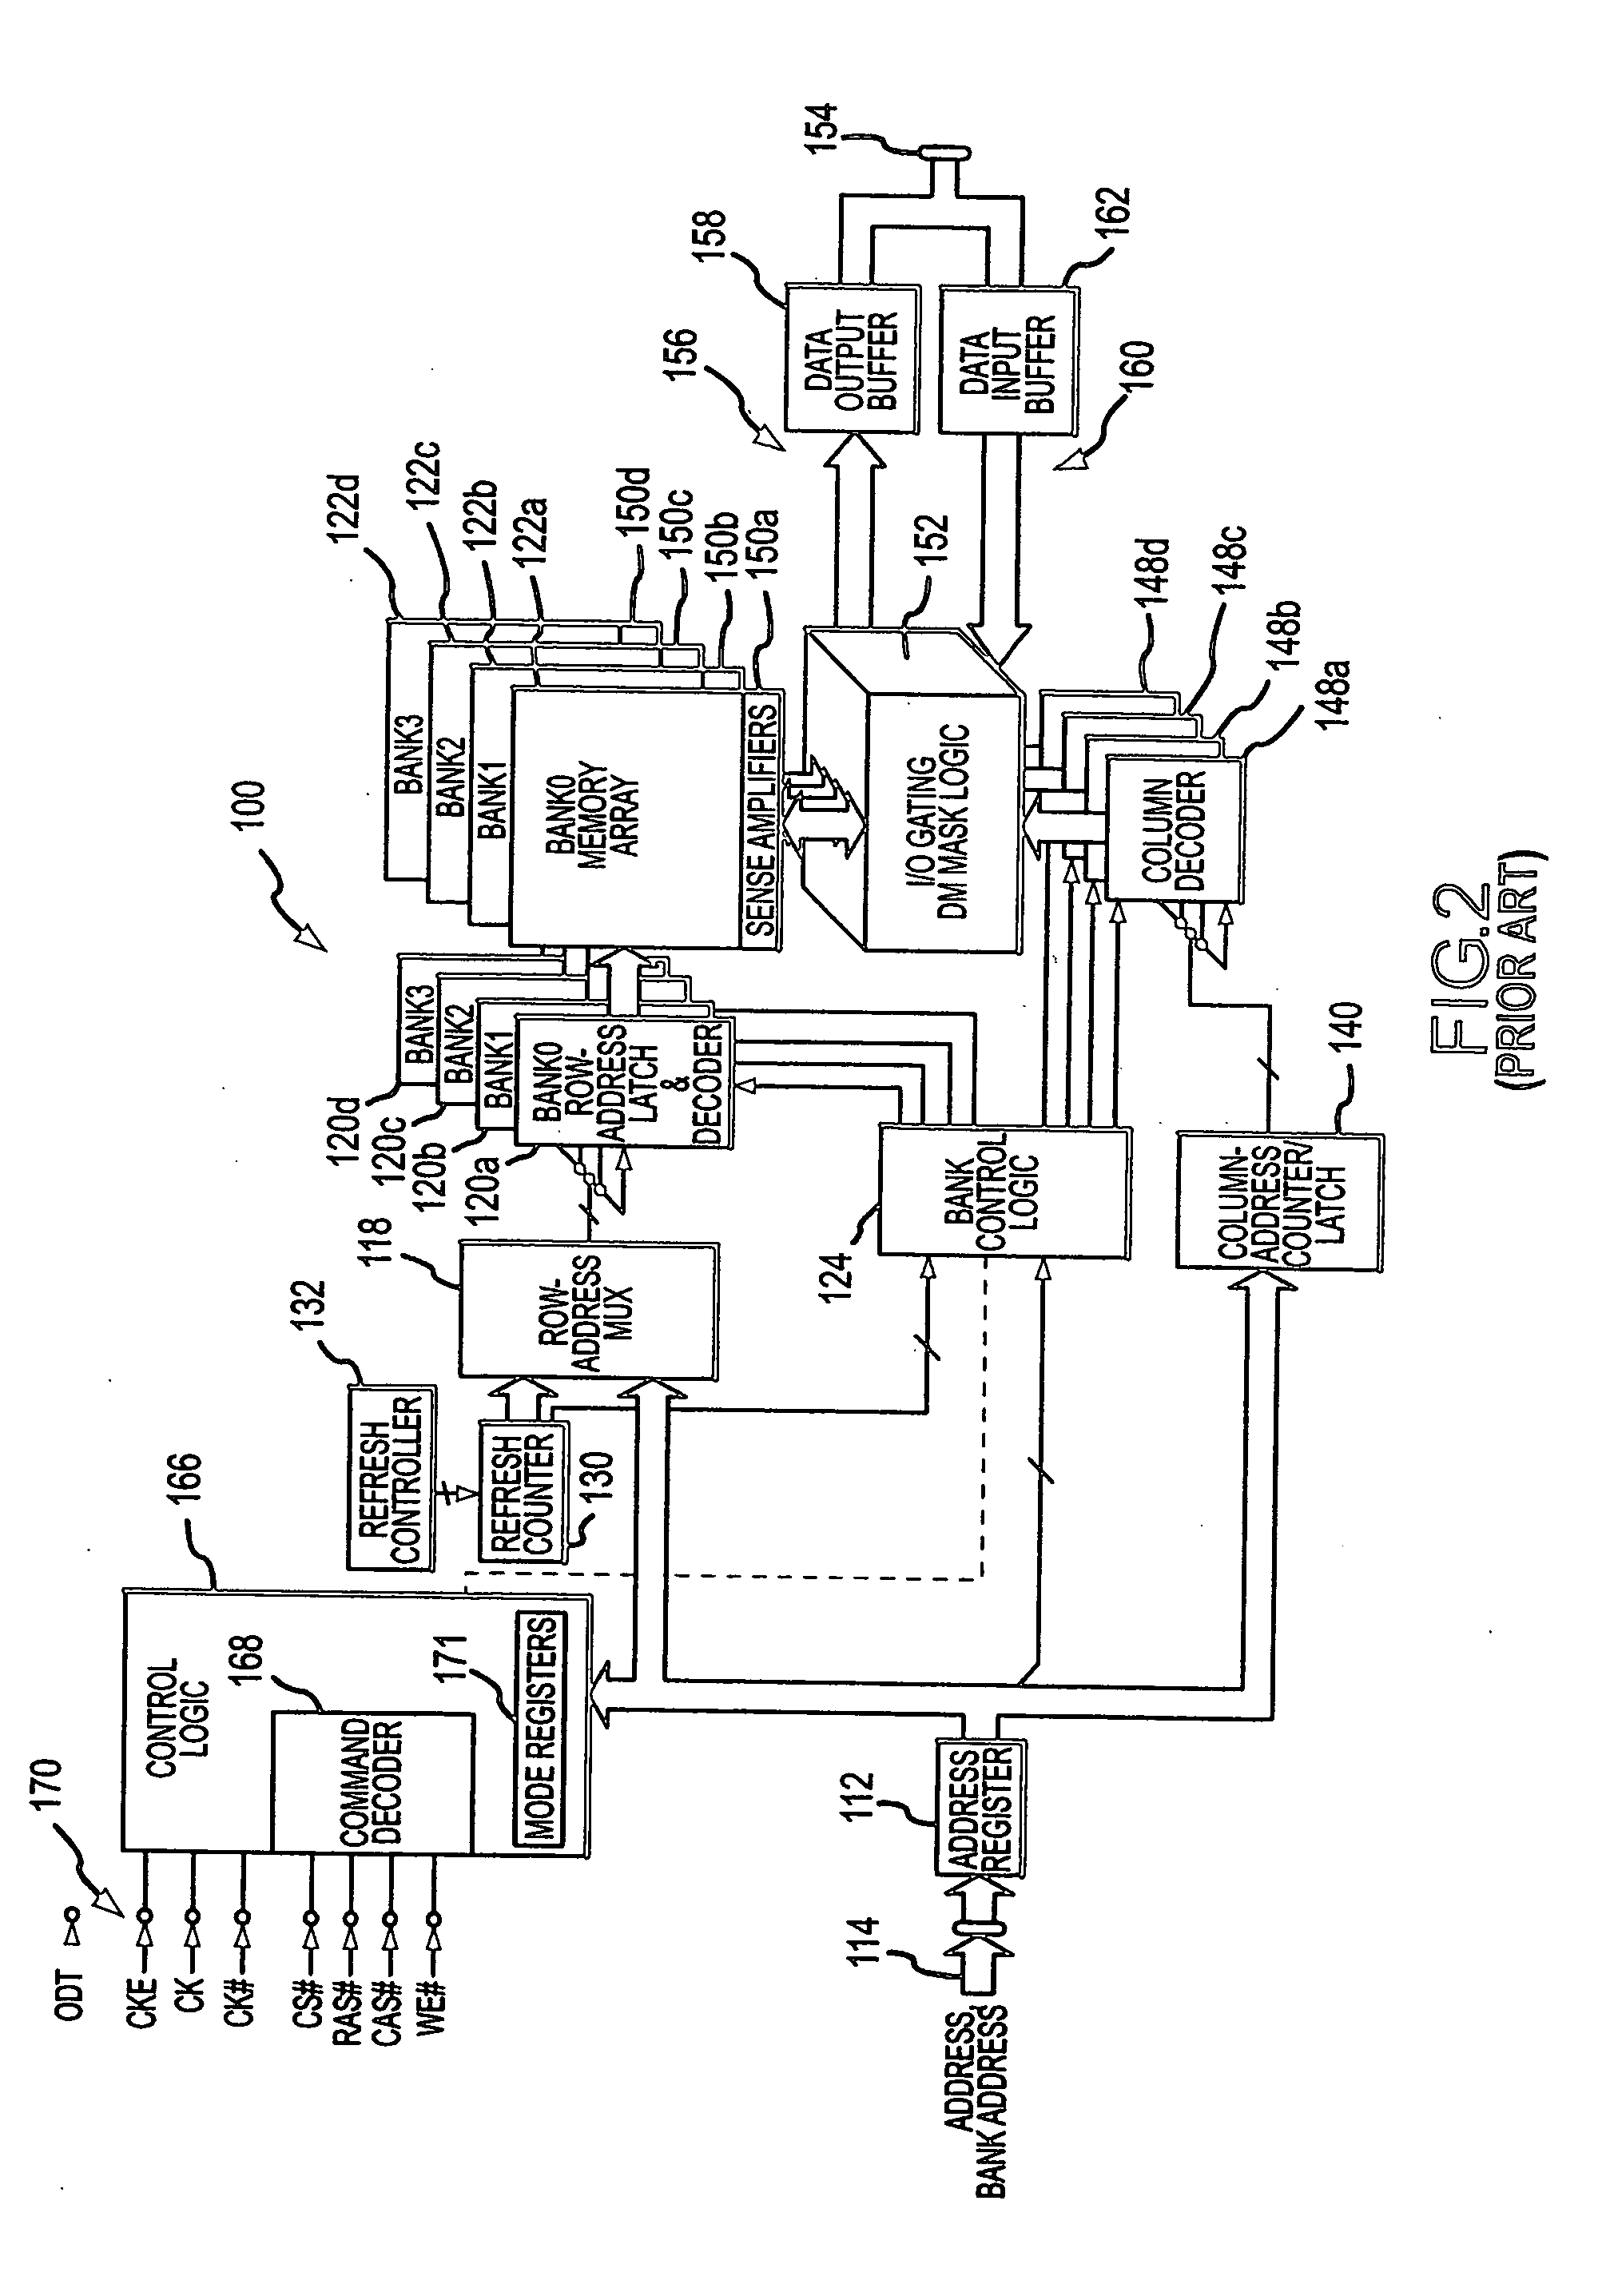 Method and system for reducing the peak current in refreshing dynamic random access memory devices